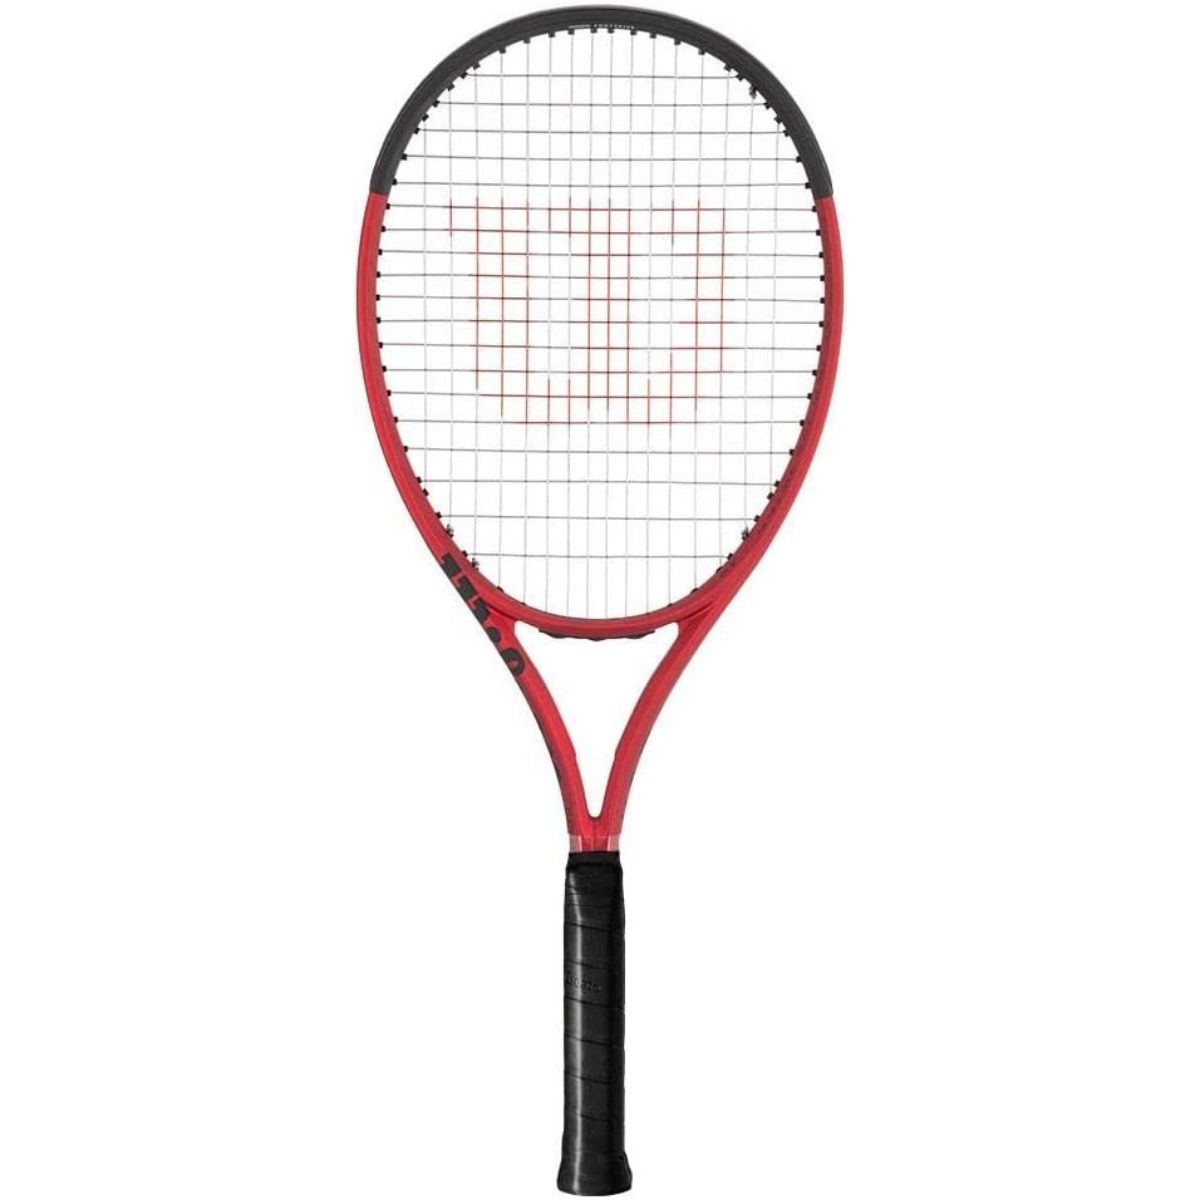 The Best Tennis Rackets for Intermediate Players Options: Wilson Clash 108